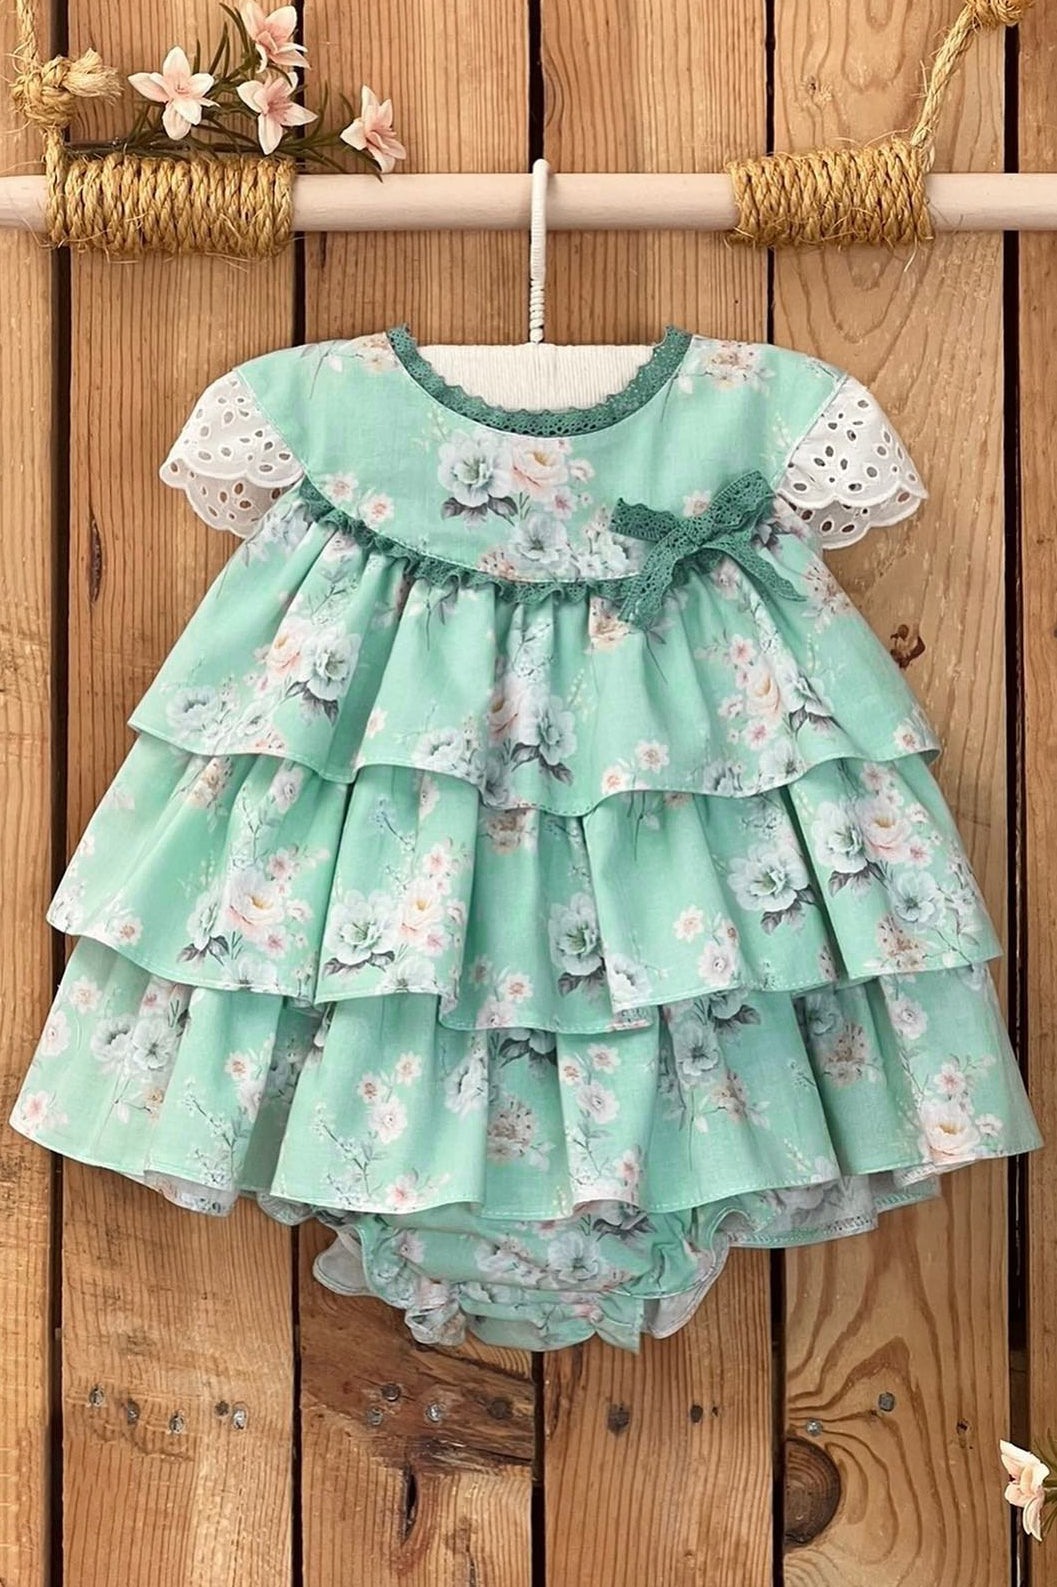 Valentina Bebes "Cordelia" Mint Floral Layered Dress & Bloomers | Millie and John